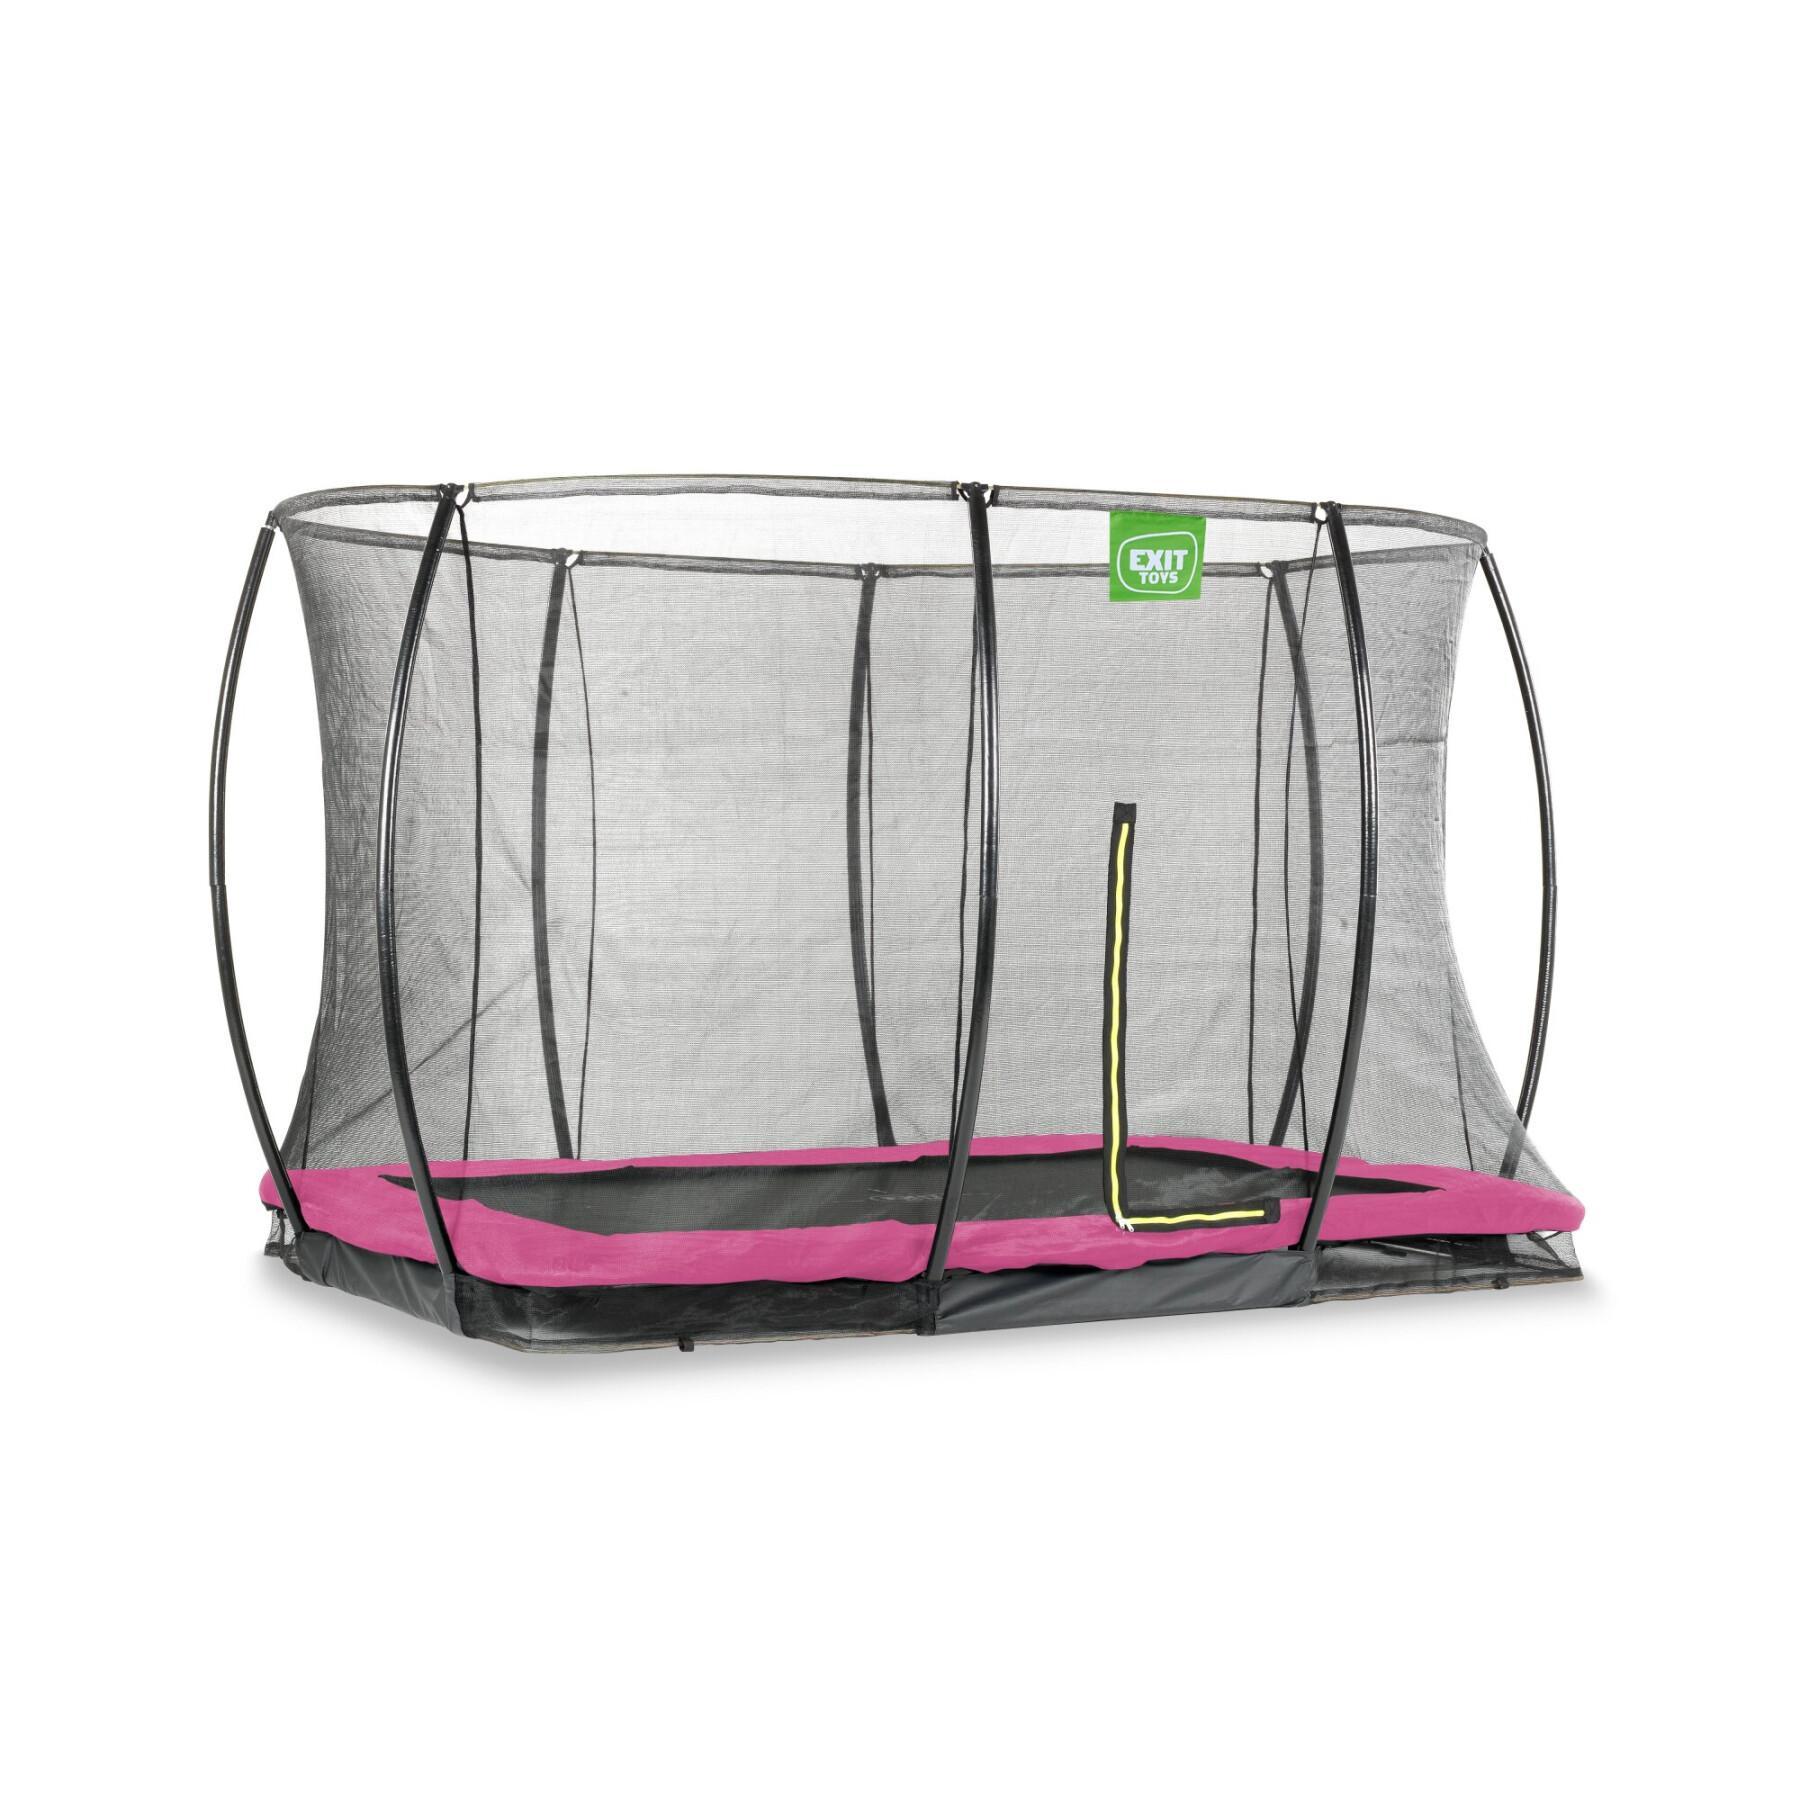 Underground trampoline with safety net Exit Toys Silhouette 244 x 366 cm